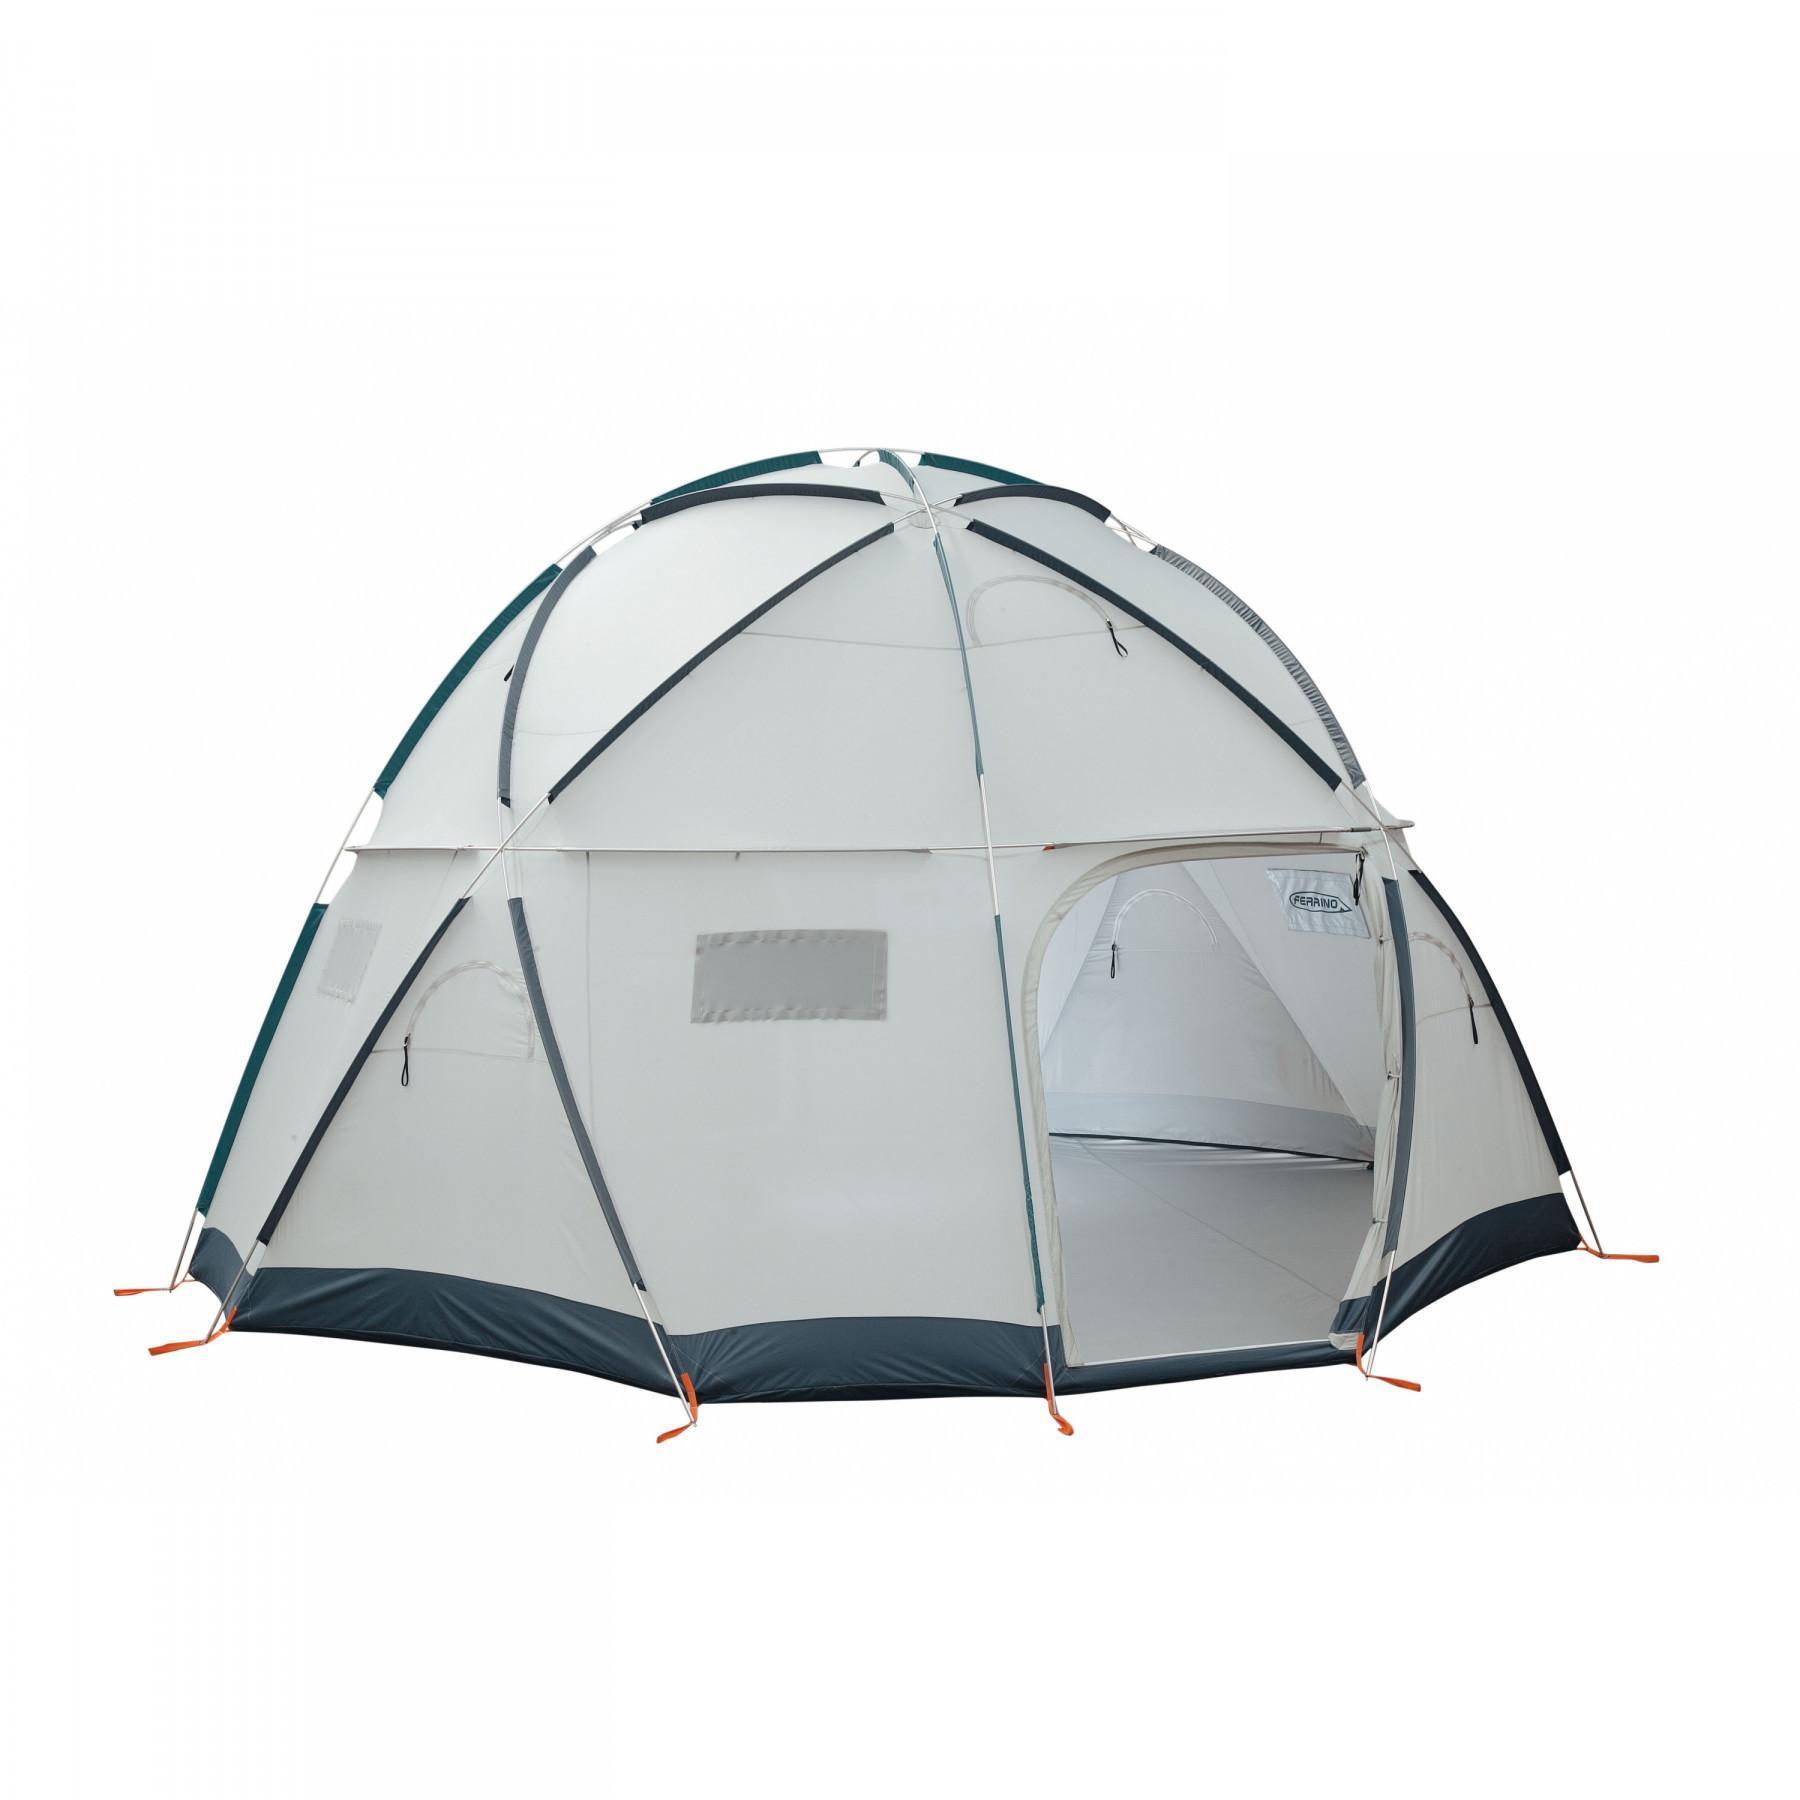 Tent Ferrino colle sud (inner + double fly)